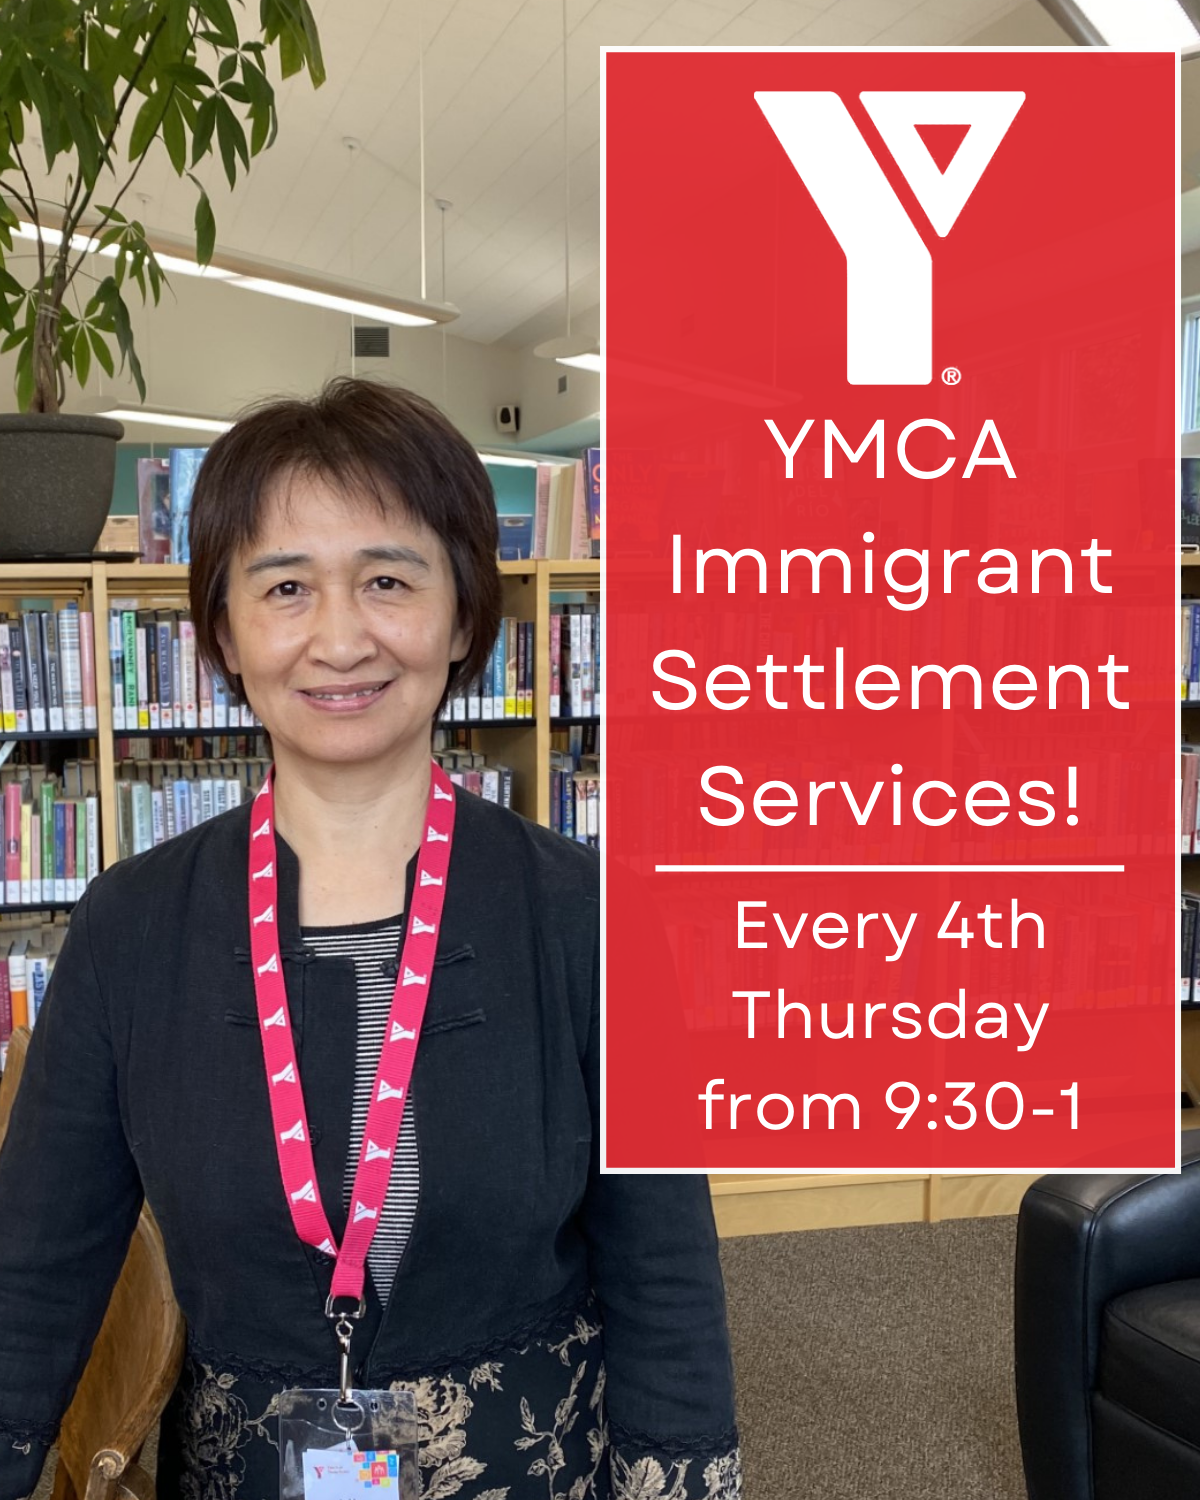 YMCA Immigrant Settlment Services - Every 4th Thursday of the month from 9:30-1pm (Sept 28, Oct 26, Nov 23, Dec 28)